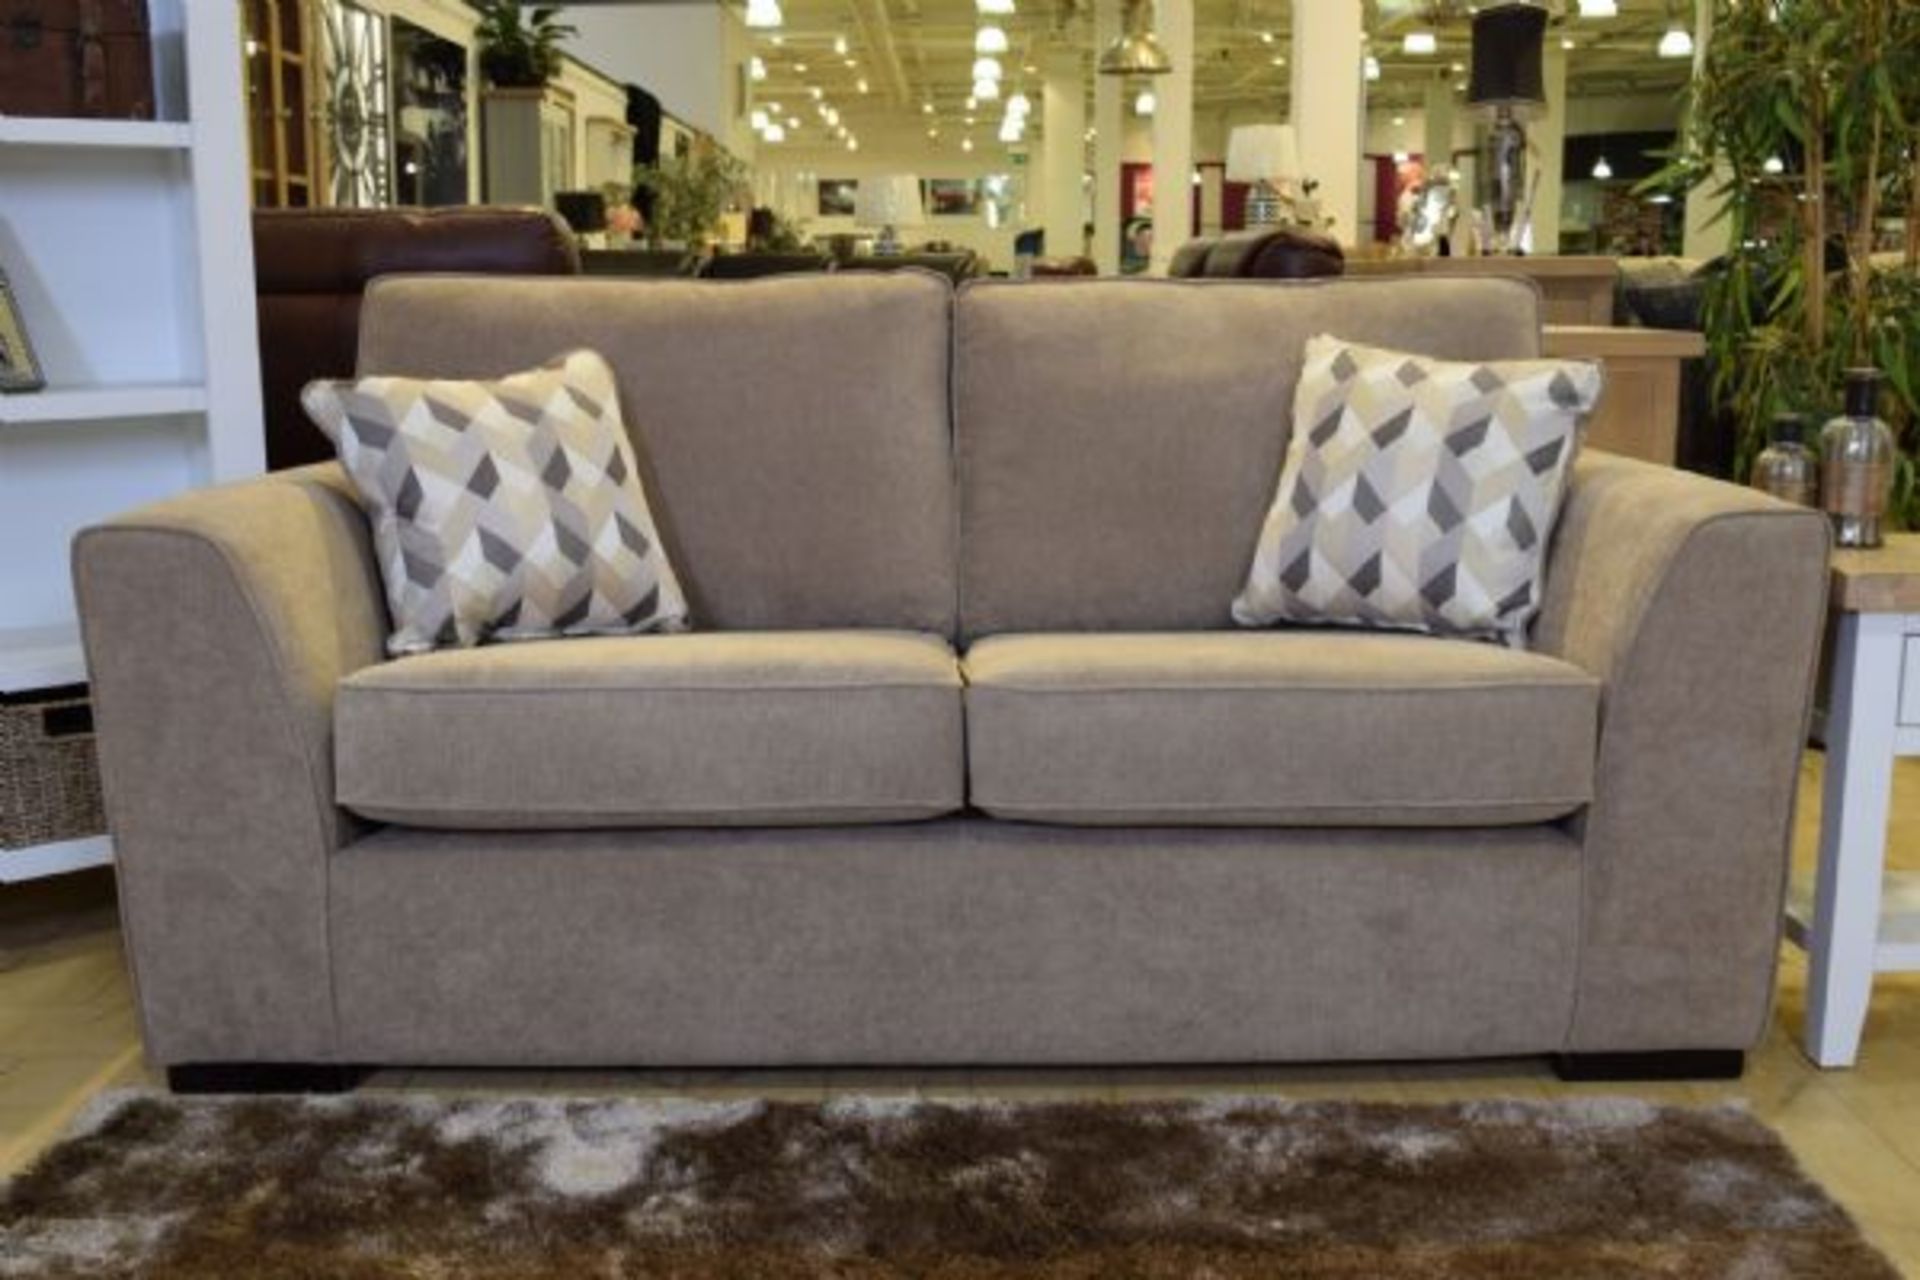 1 BRAND NEW BAGGED 2.5 SEATER SOFA IN TAUPE / 42592 (VIEWING HIGHLY RECOMMENDED)